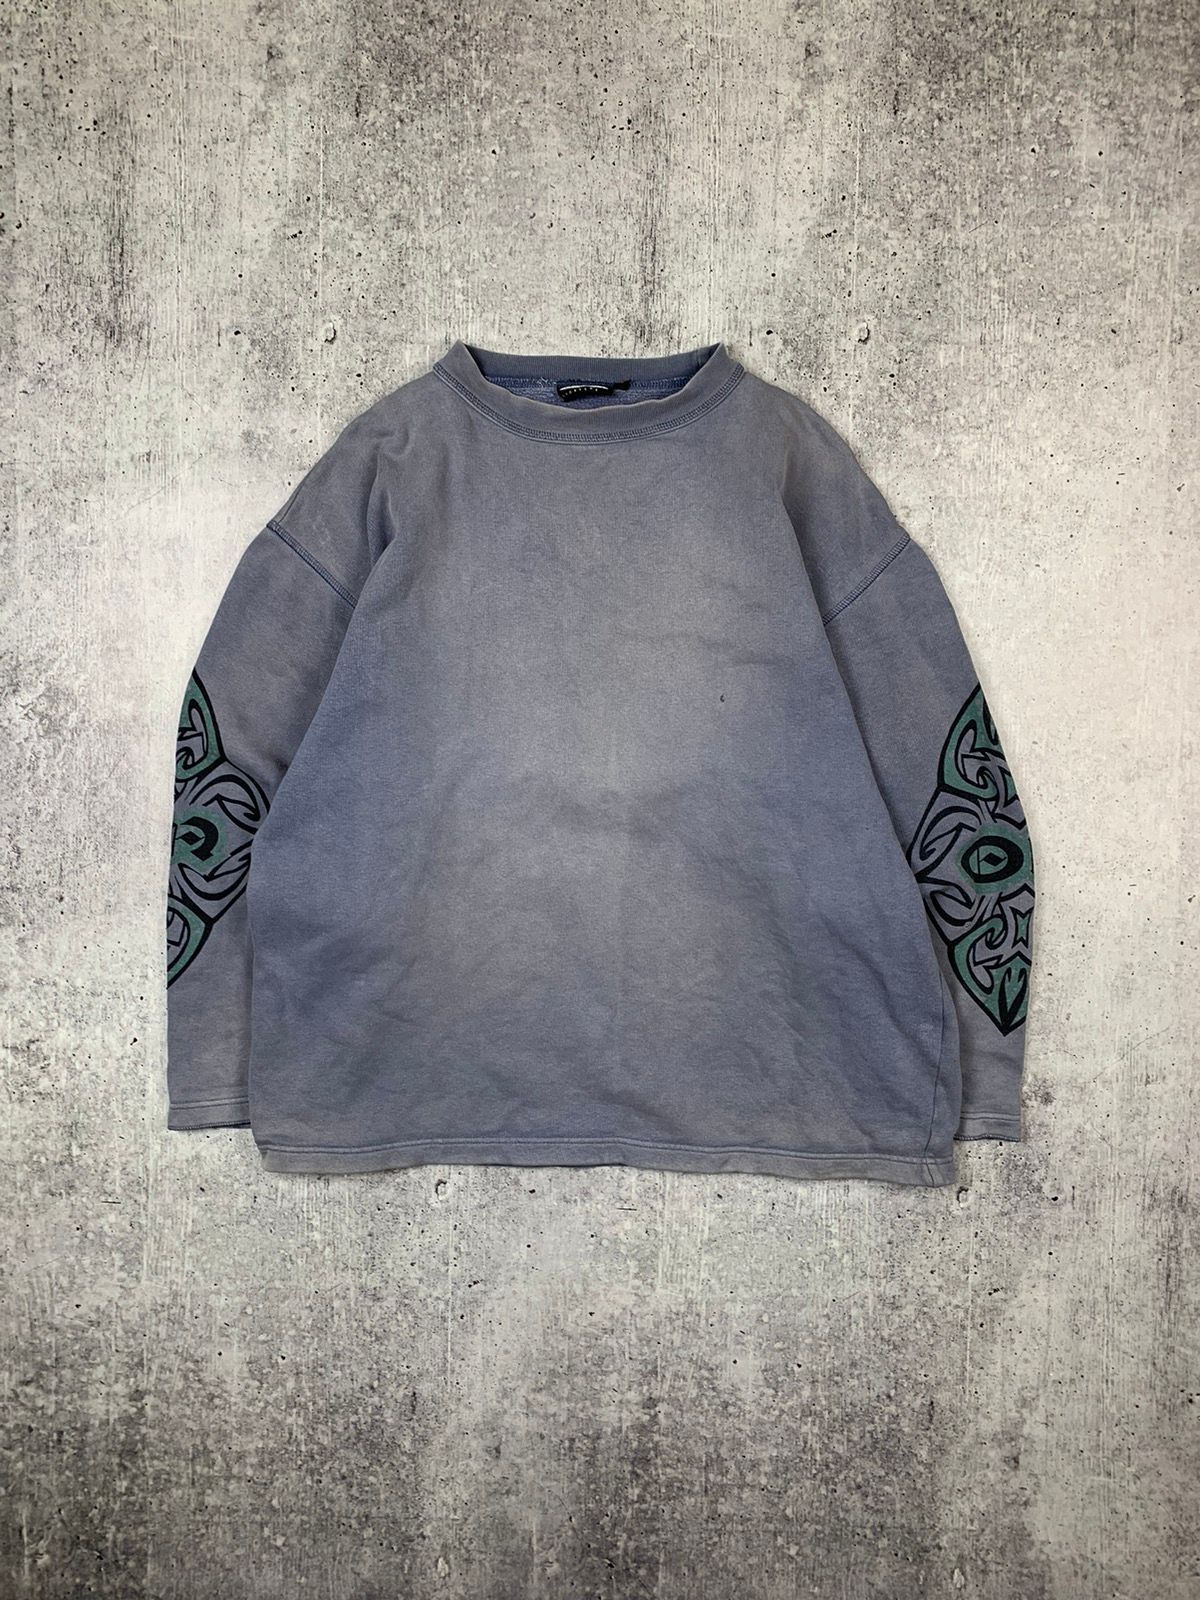 Pre-owned Oneill X Vintage Sunfaded Trashed Oneill Sweatshirt Long Sleeve Y2k In Blue Fade